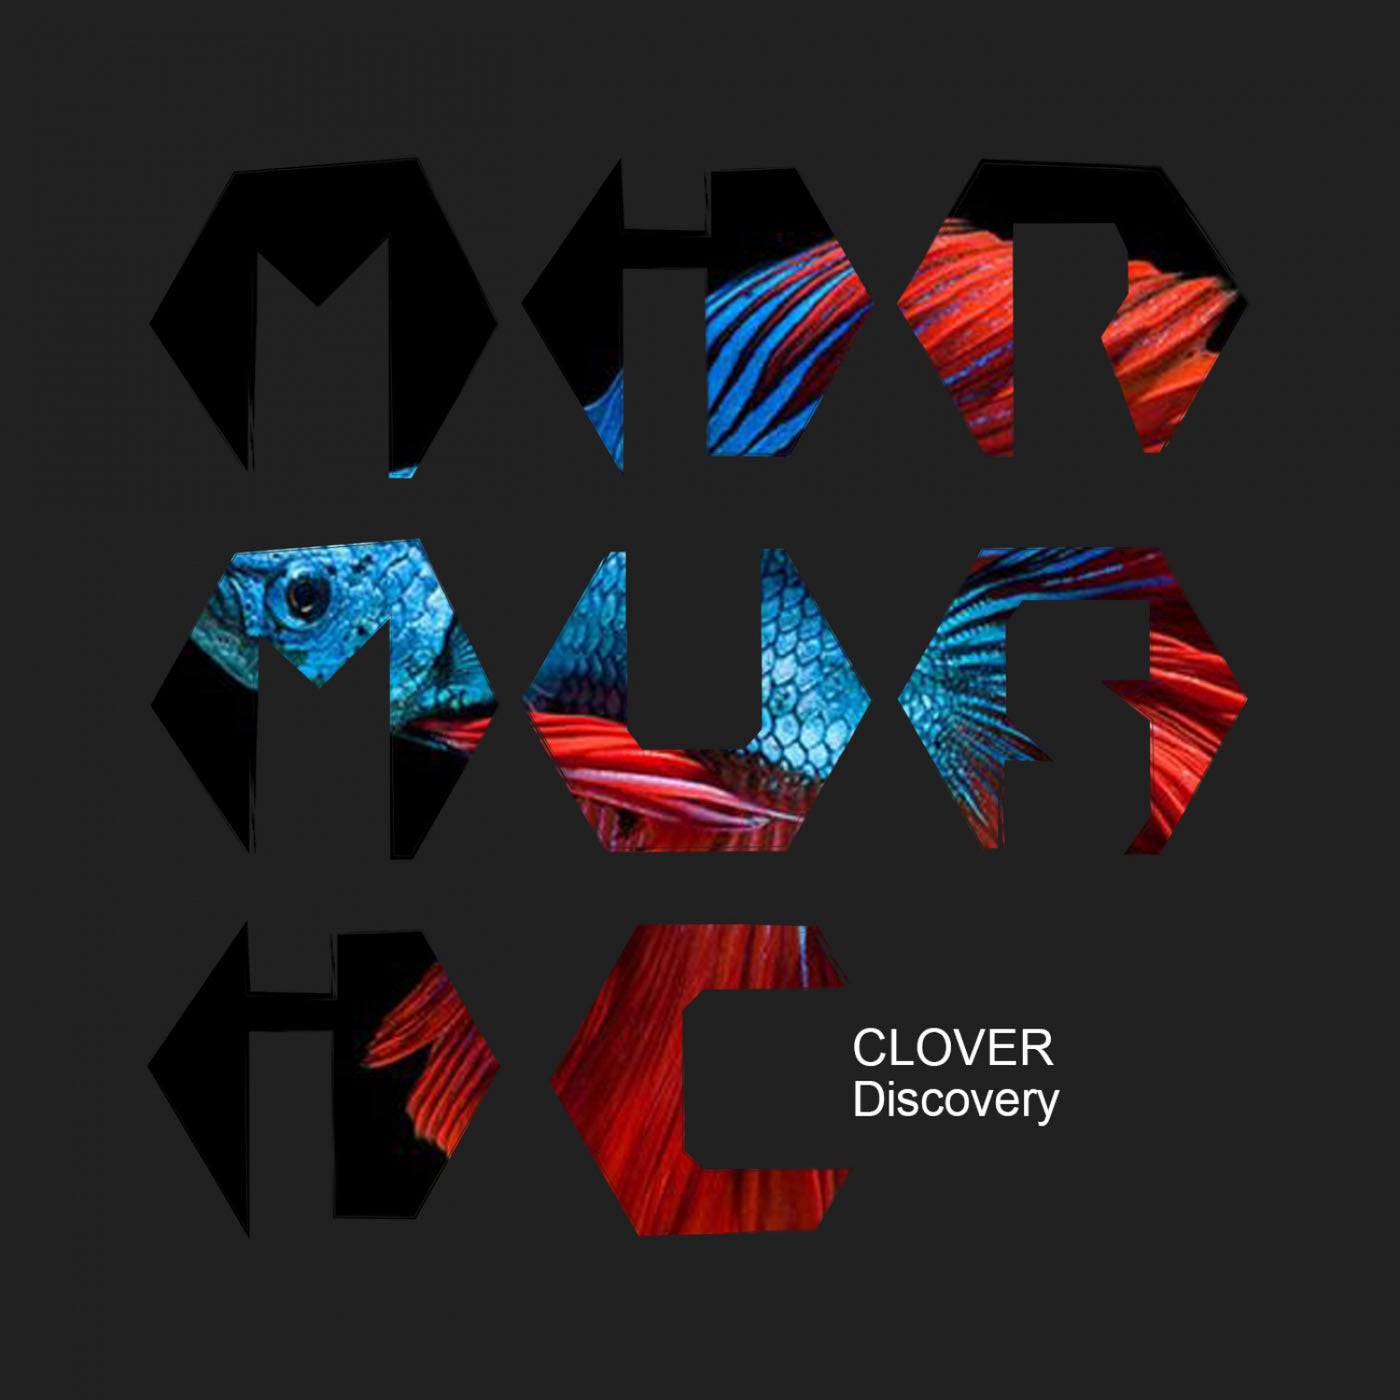 Clover – Discovery [MIRM079]